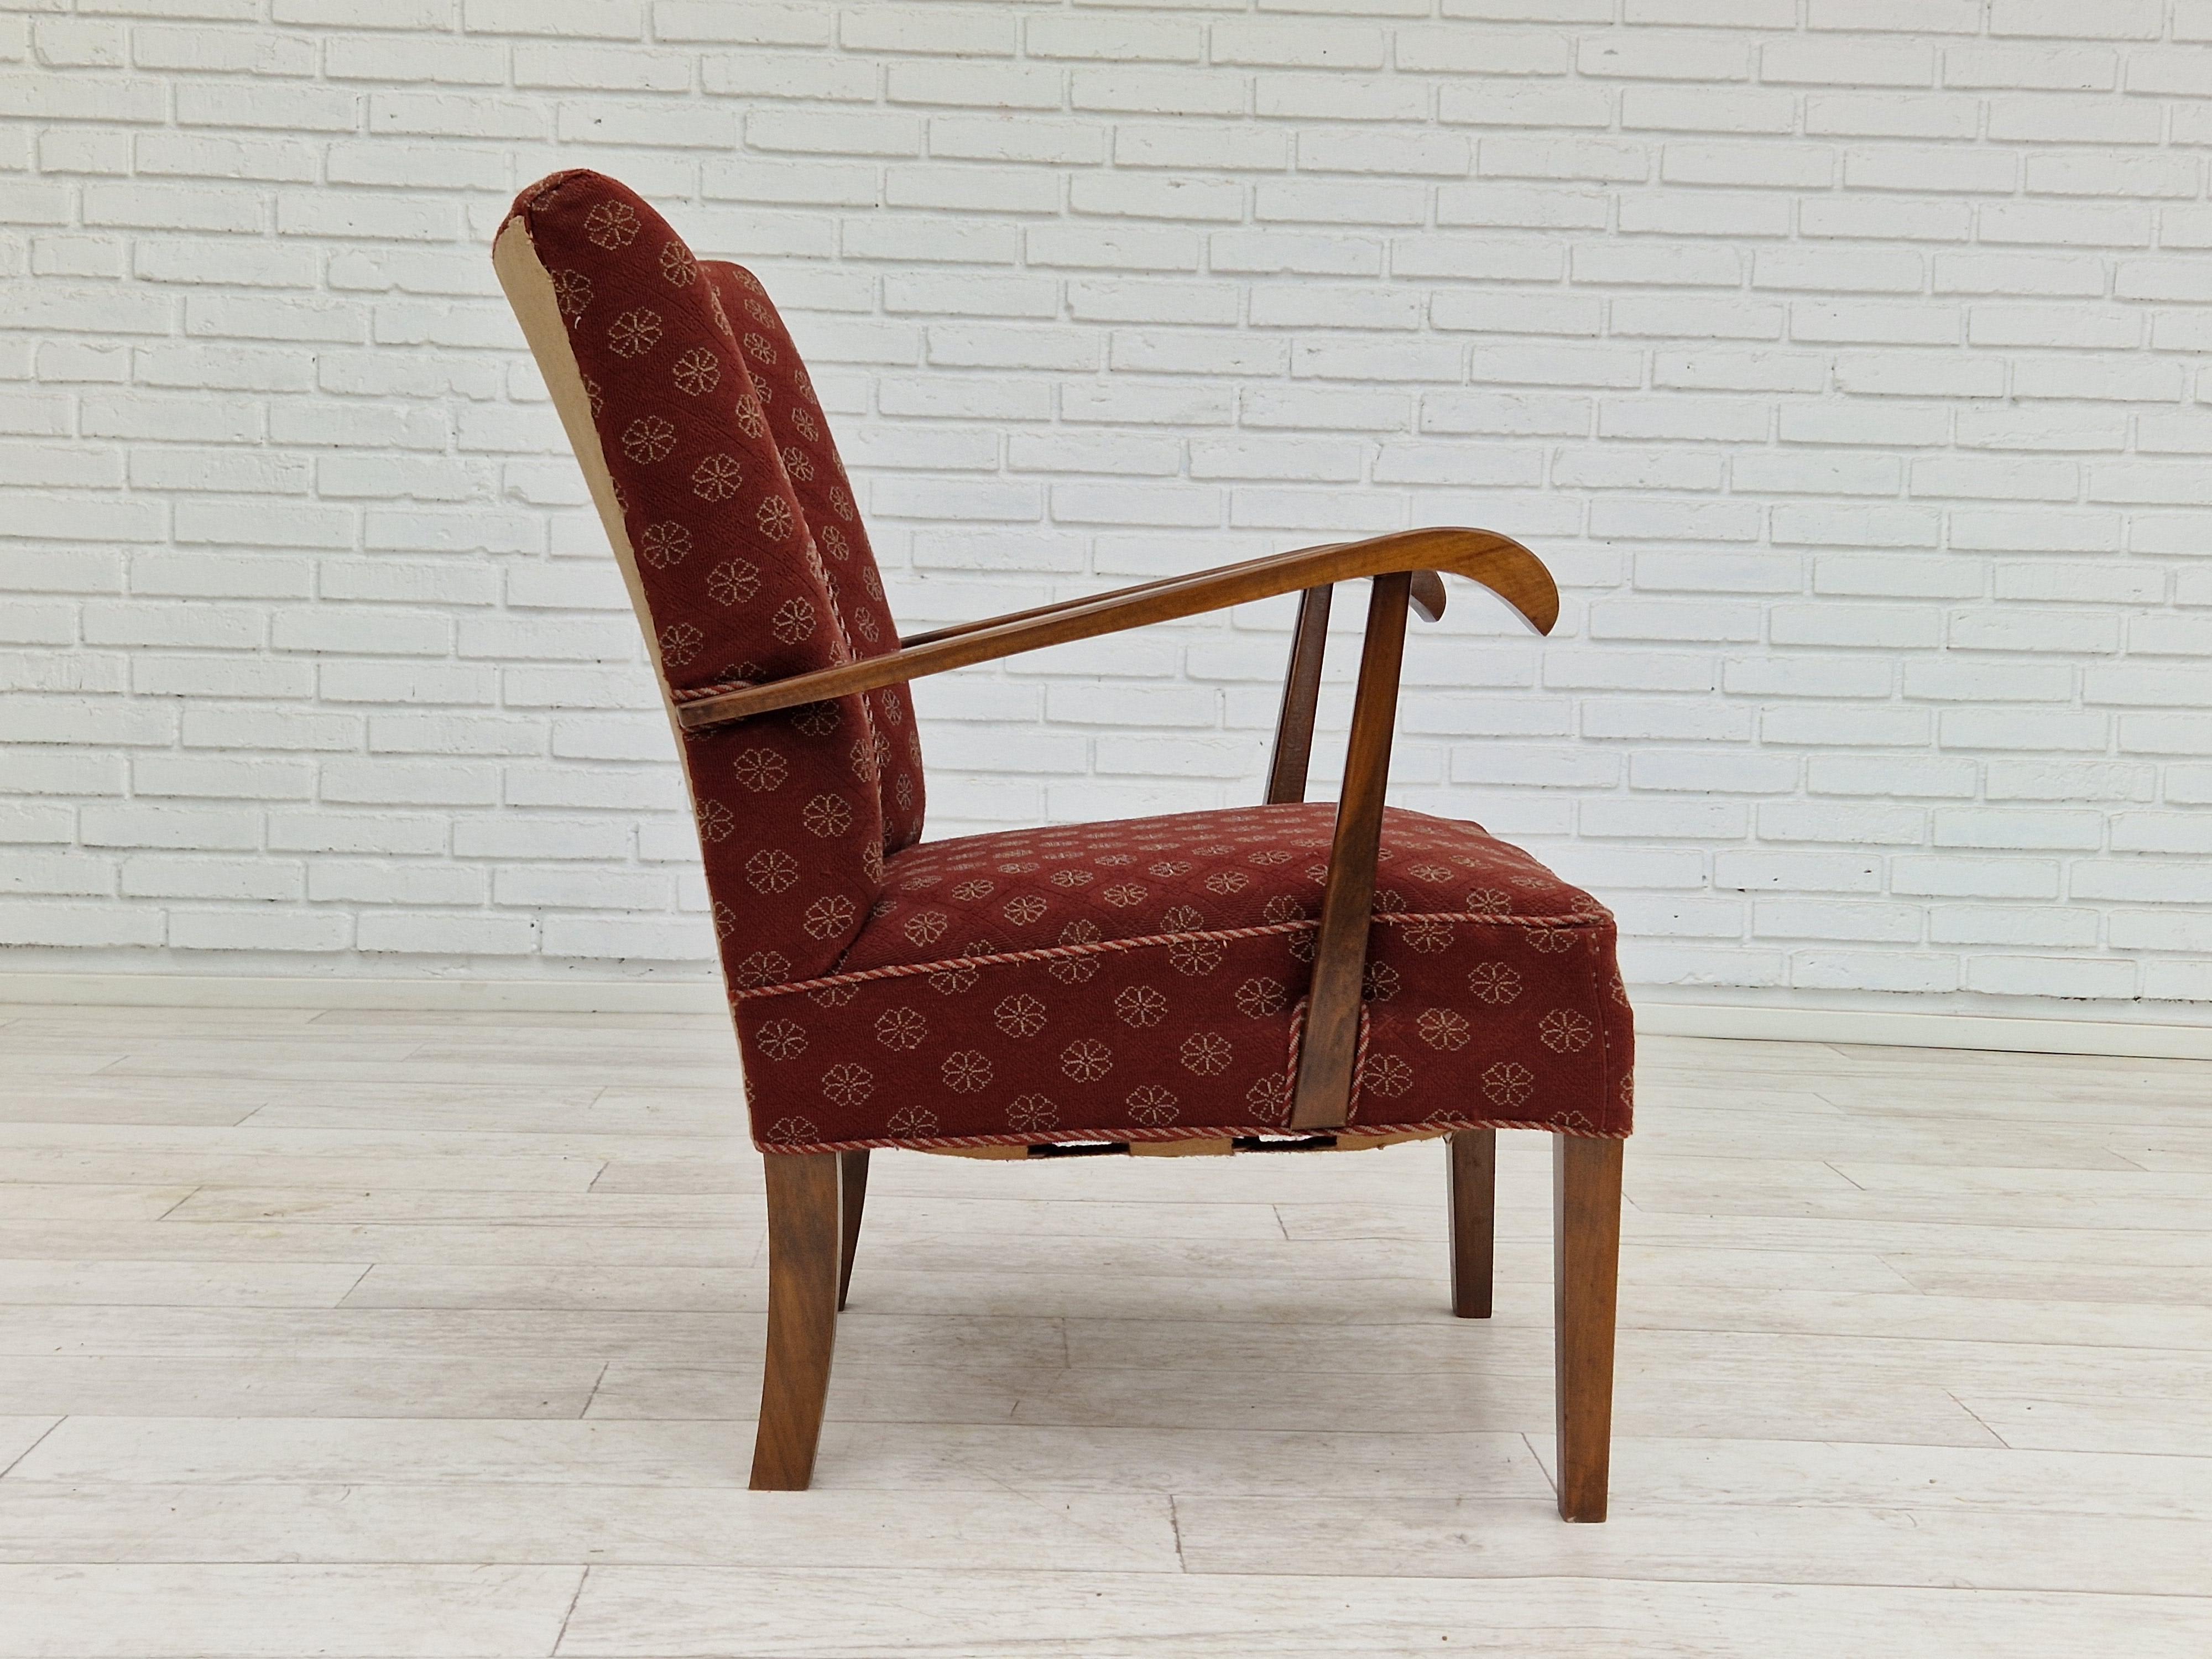 Mid-20th Century 1950s, Danish Design, Original Armchair in Very Good Condition For Sale